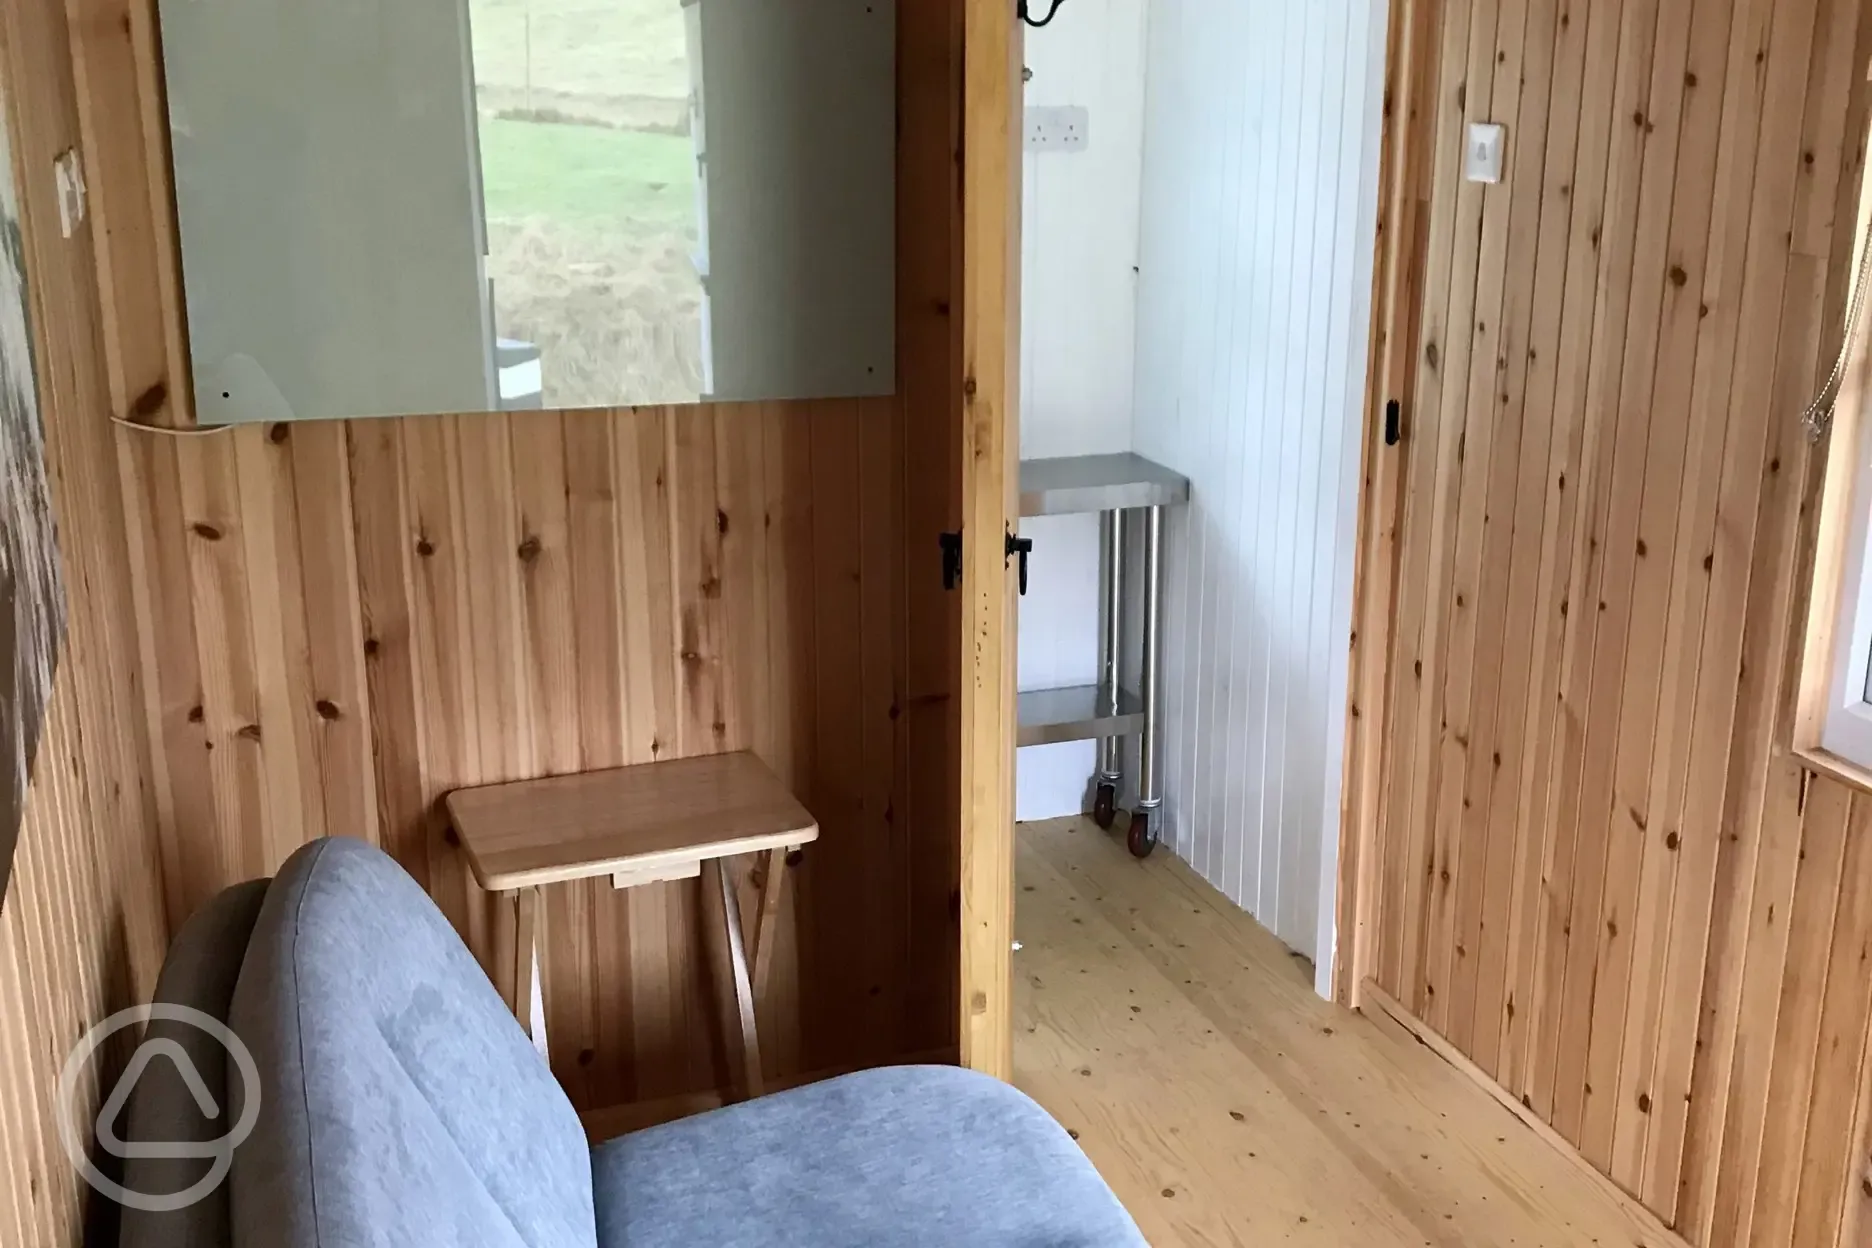 Shepherds hut - interior with sofa bed and panel heater